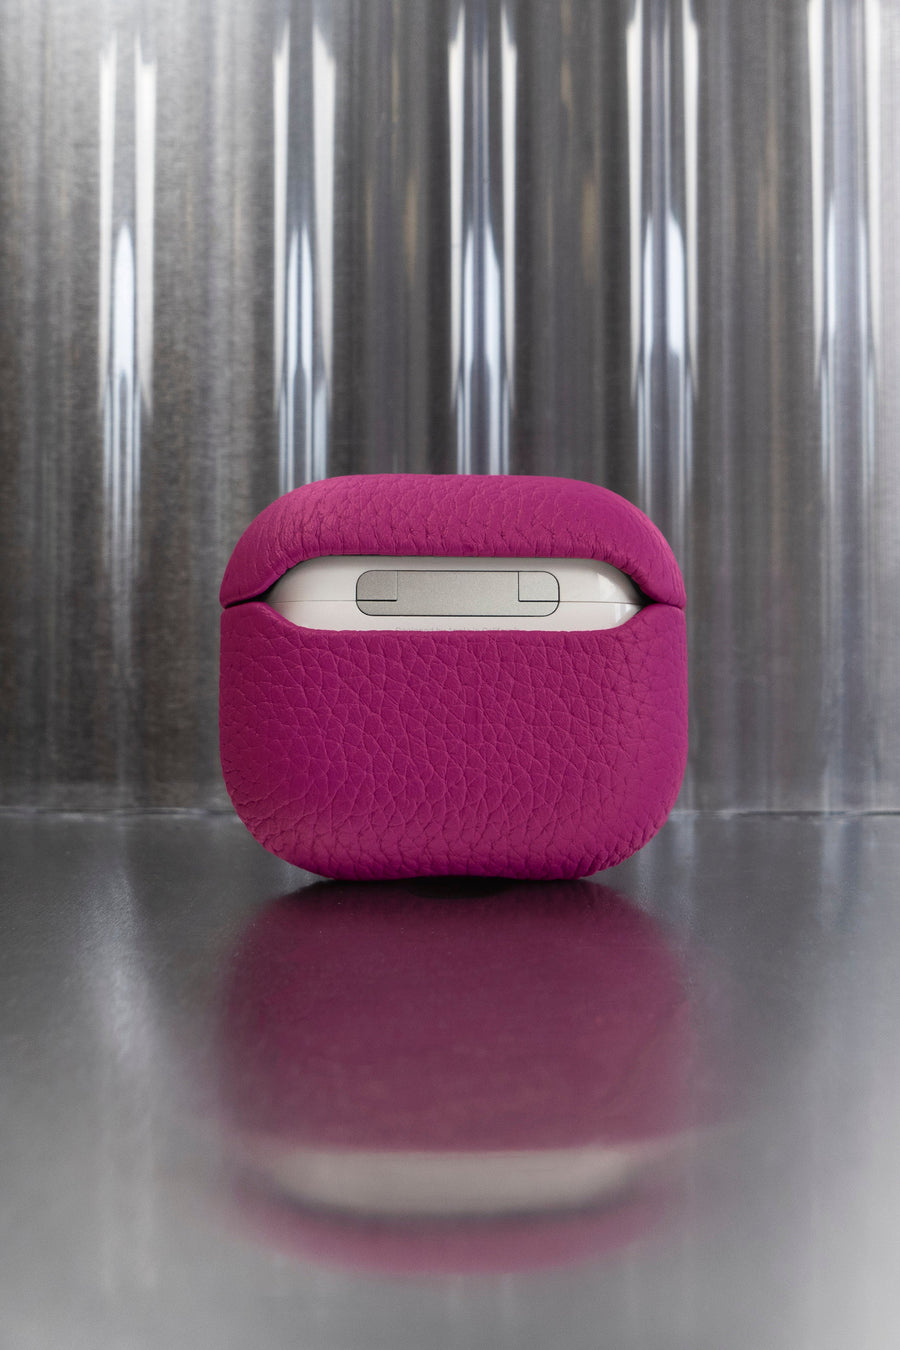 Tapper's luxurious hot pink genuine cow leather AirPods case protects and elevates the look of your AirPods. The luxurious, protective case for AirPods with a metal logo plate colored in silver steps up your AirPods game. The next must-have high end protective Apple AirPods accessory in bright pink real leather with metal details. Compatible with AirPods (3rd generation). Designed in Sweden by Tapper. Free Express Shipping at gettapper.com